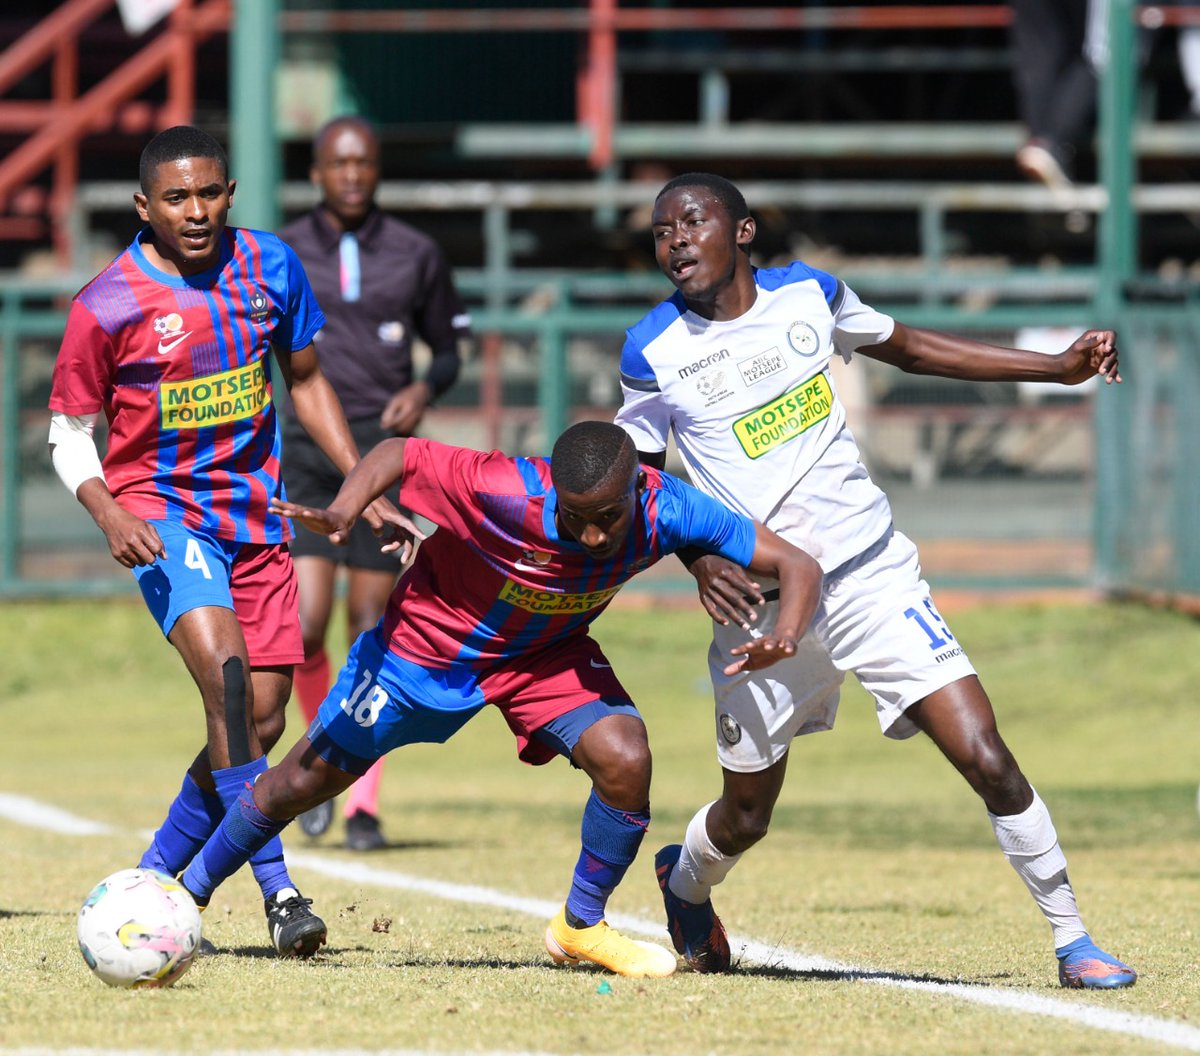 RESULT 

Platinum 1-0 Spear of the Nation

*La Masia are promoted to the #GladAfricaChampionship and secure a place in the final on Sunday. 

#FARPost #ABCMotsepePlayoffs